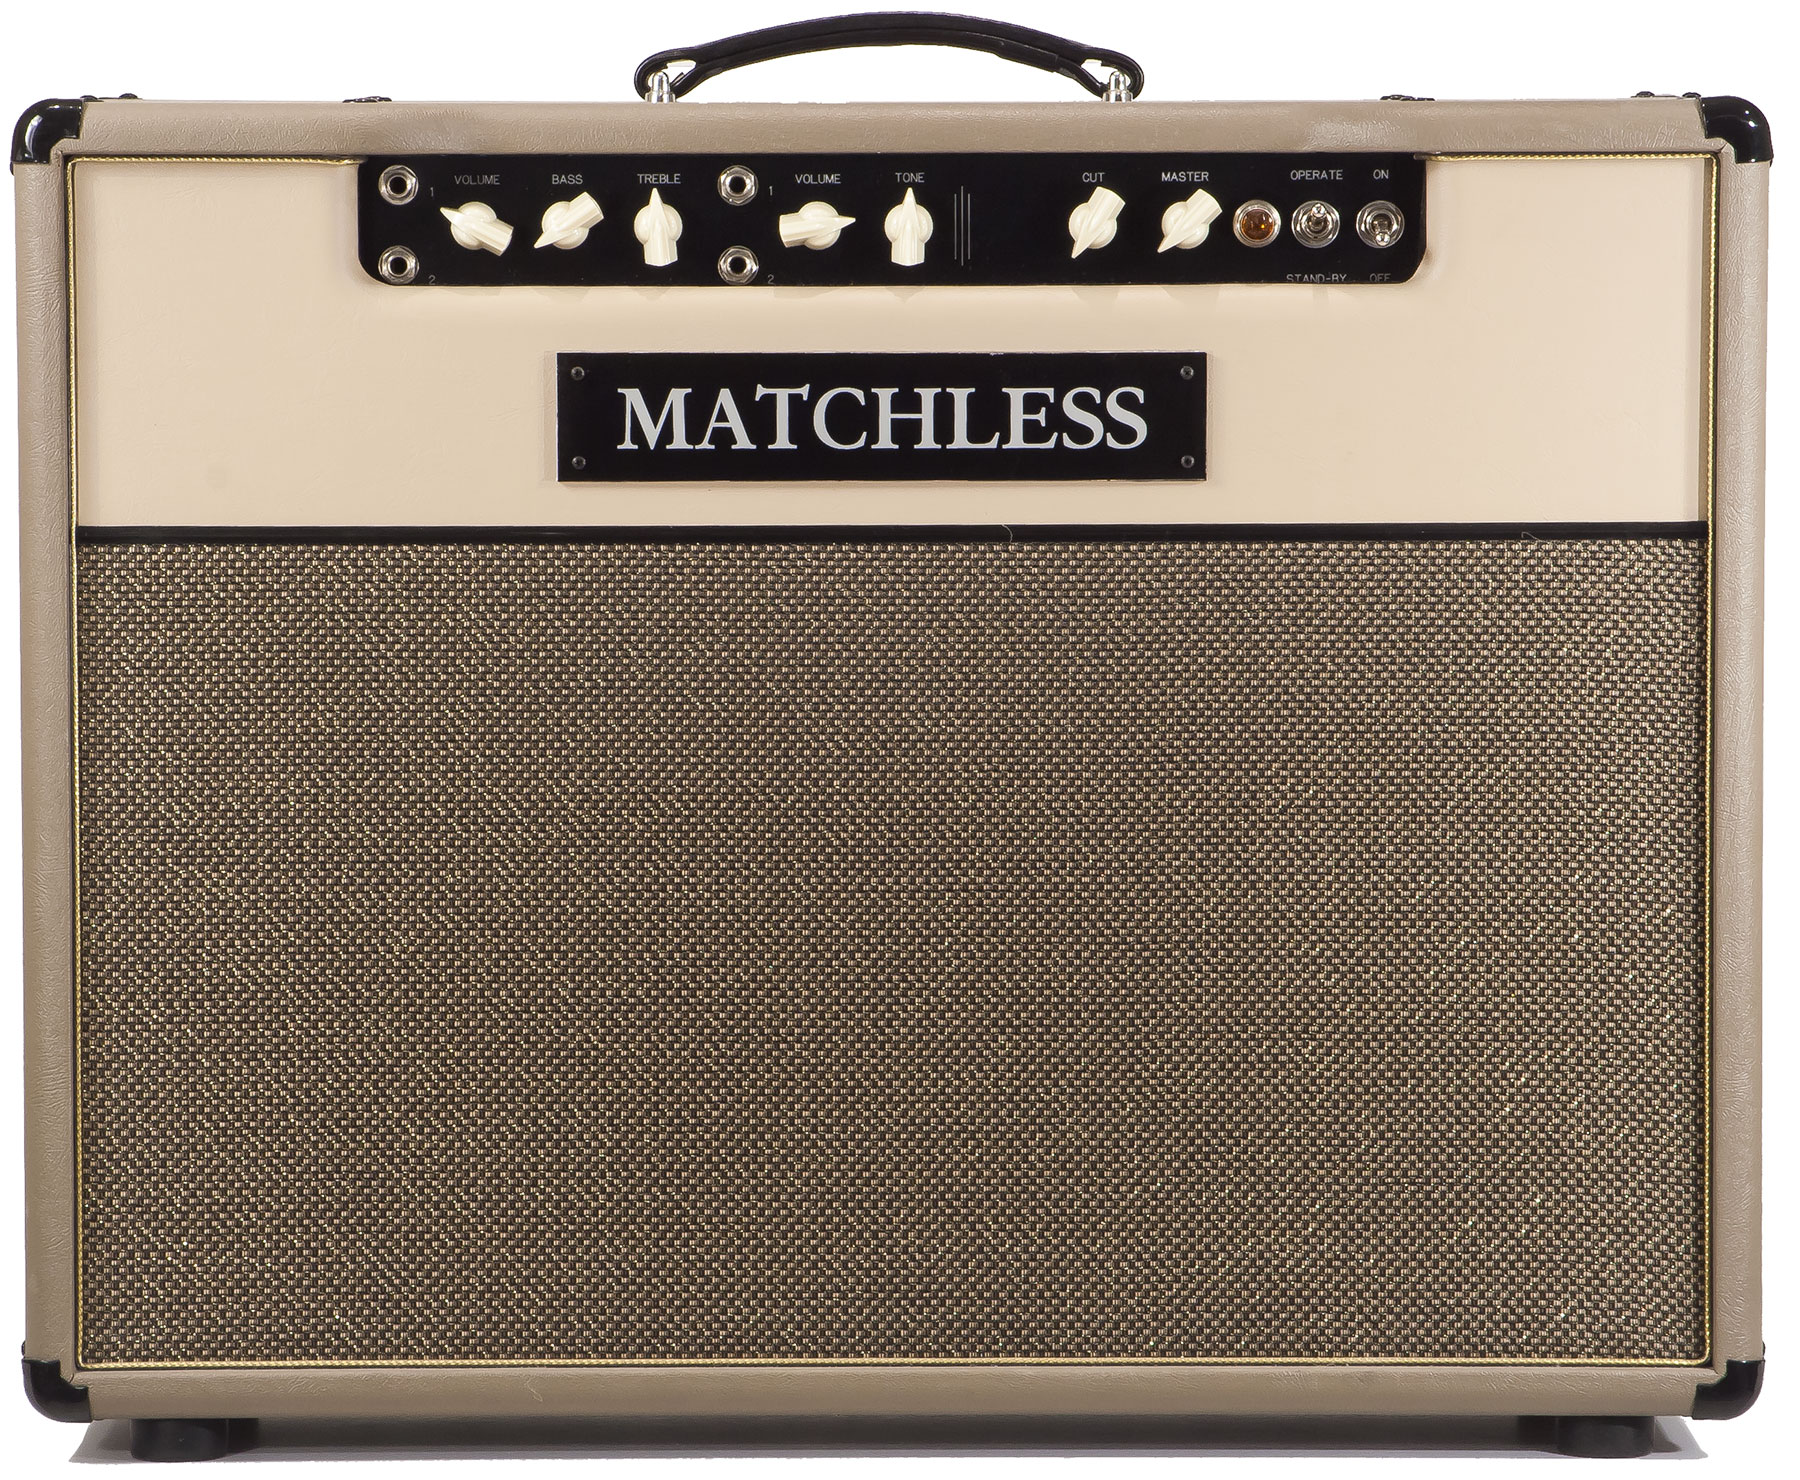 Matchless Dc-30 30w 2x12 Cappuccino/gold - Electric guitar combo amp - Variation 1